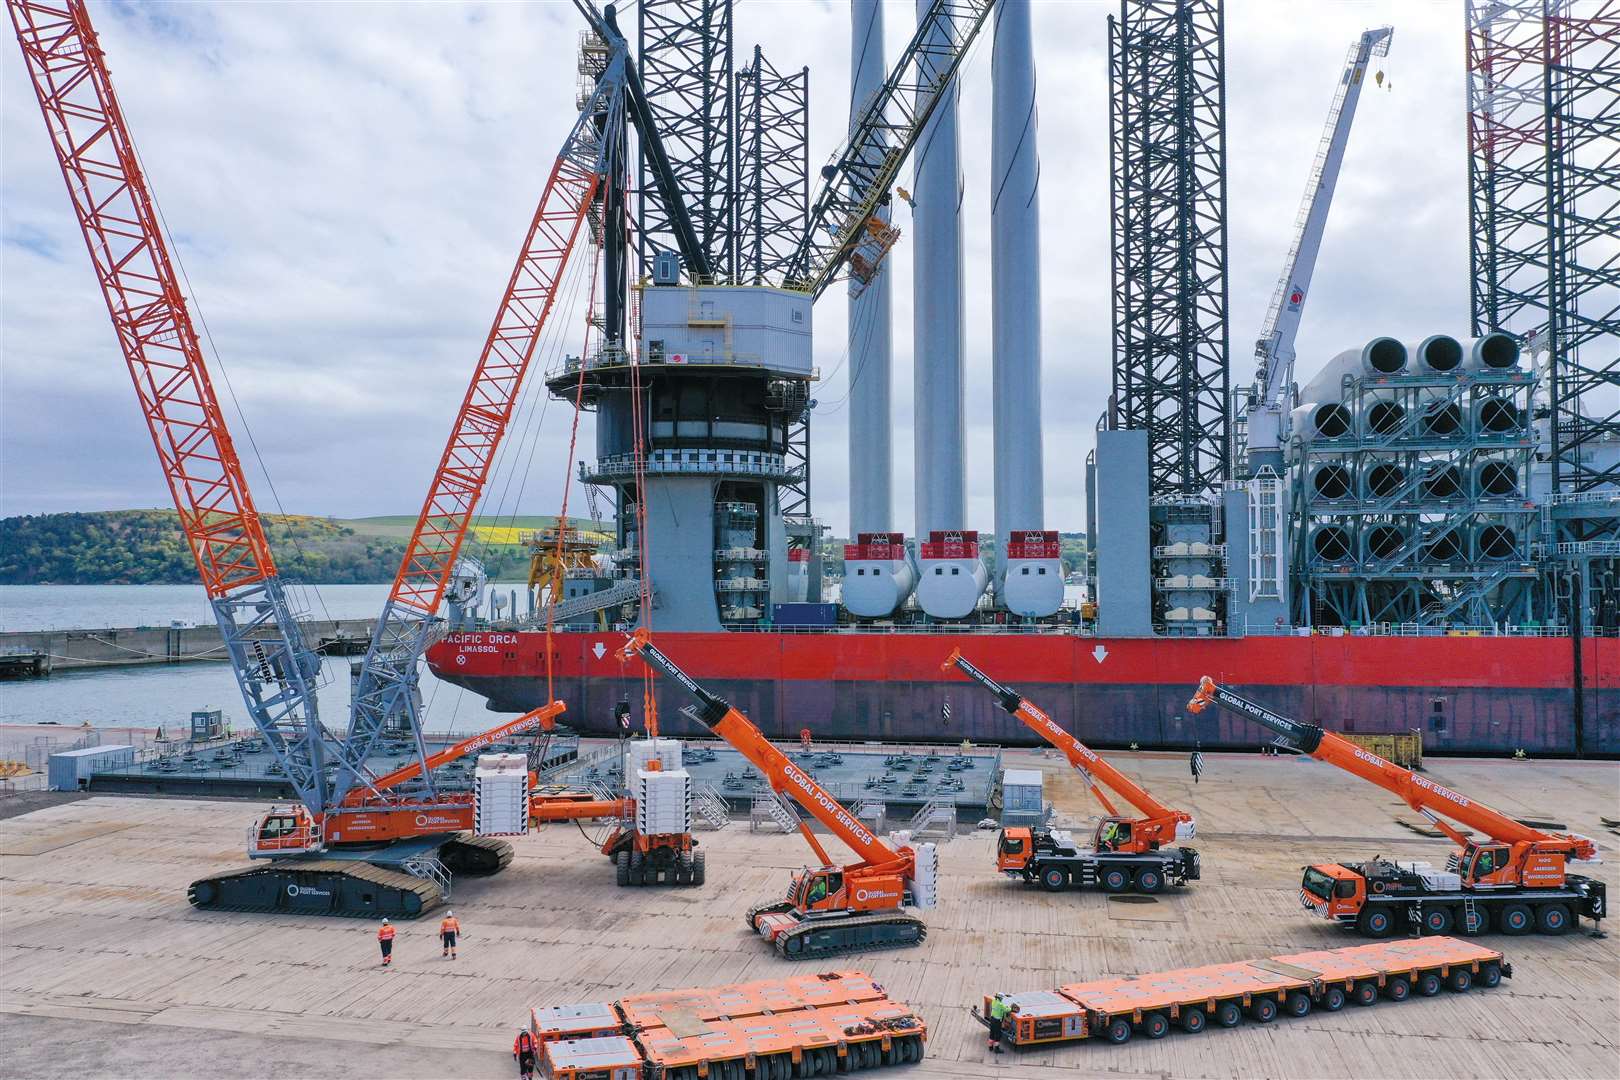 Global Energy Group Moray East cranes and logistics at Port of Nigg.